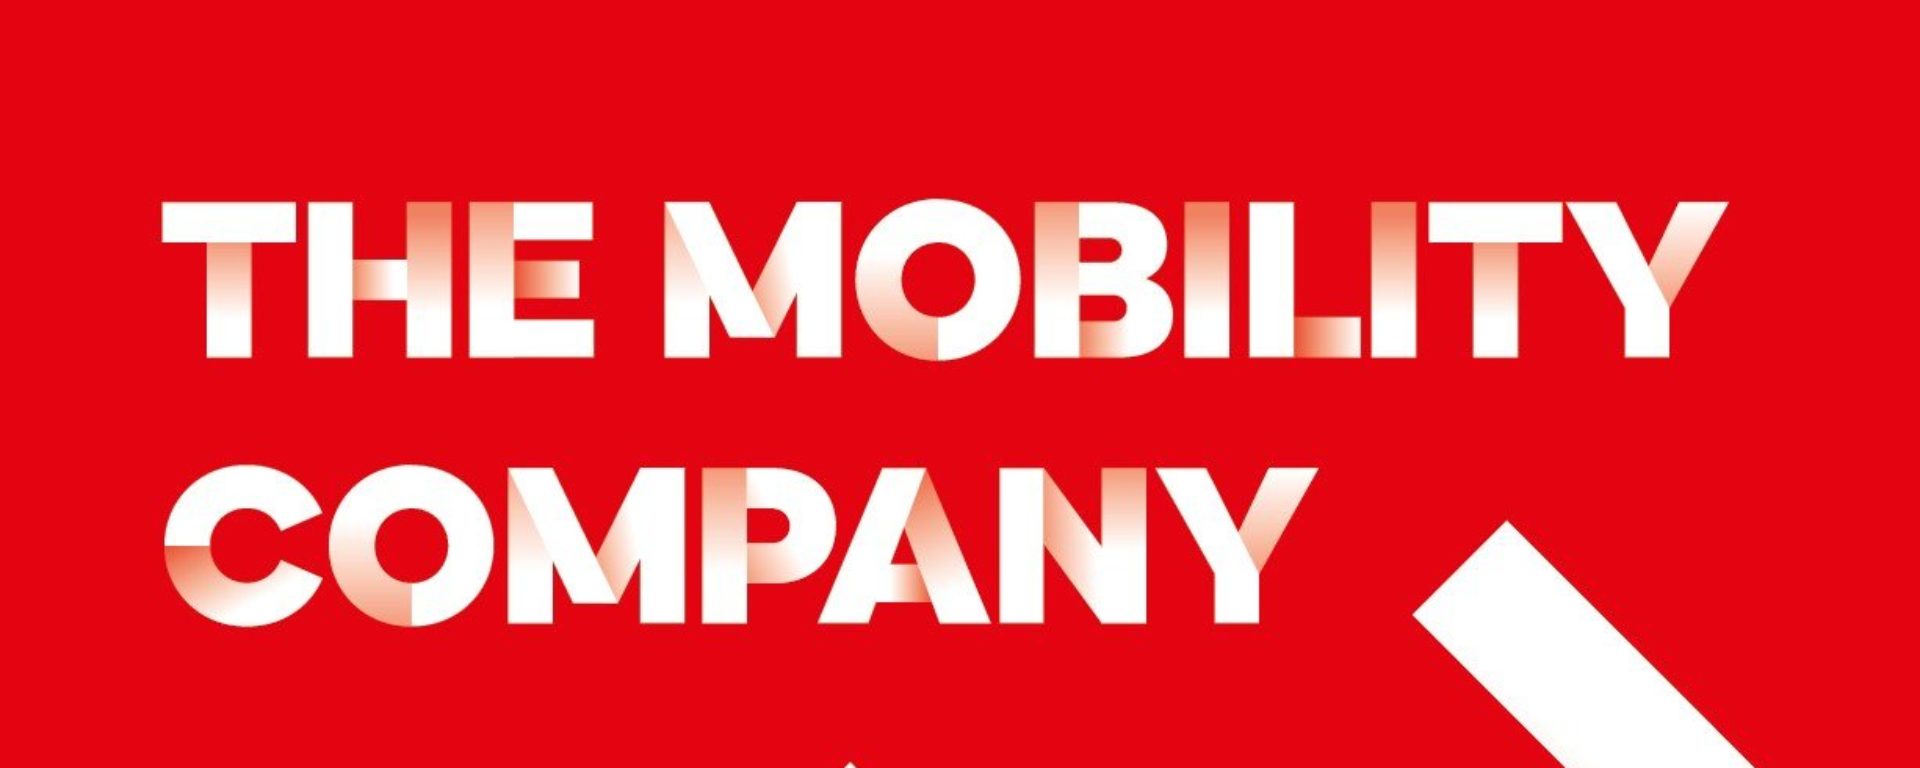 Transdev-Group-The-mobility-company